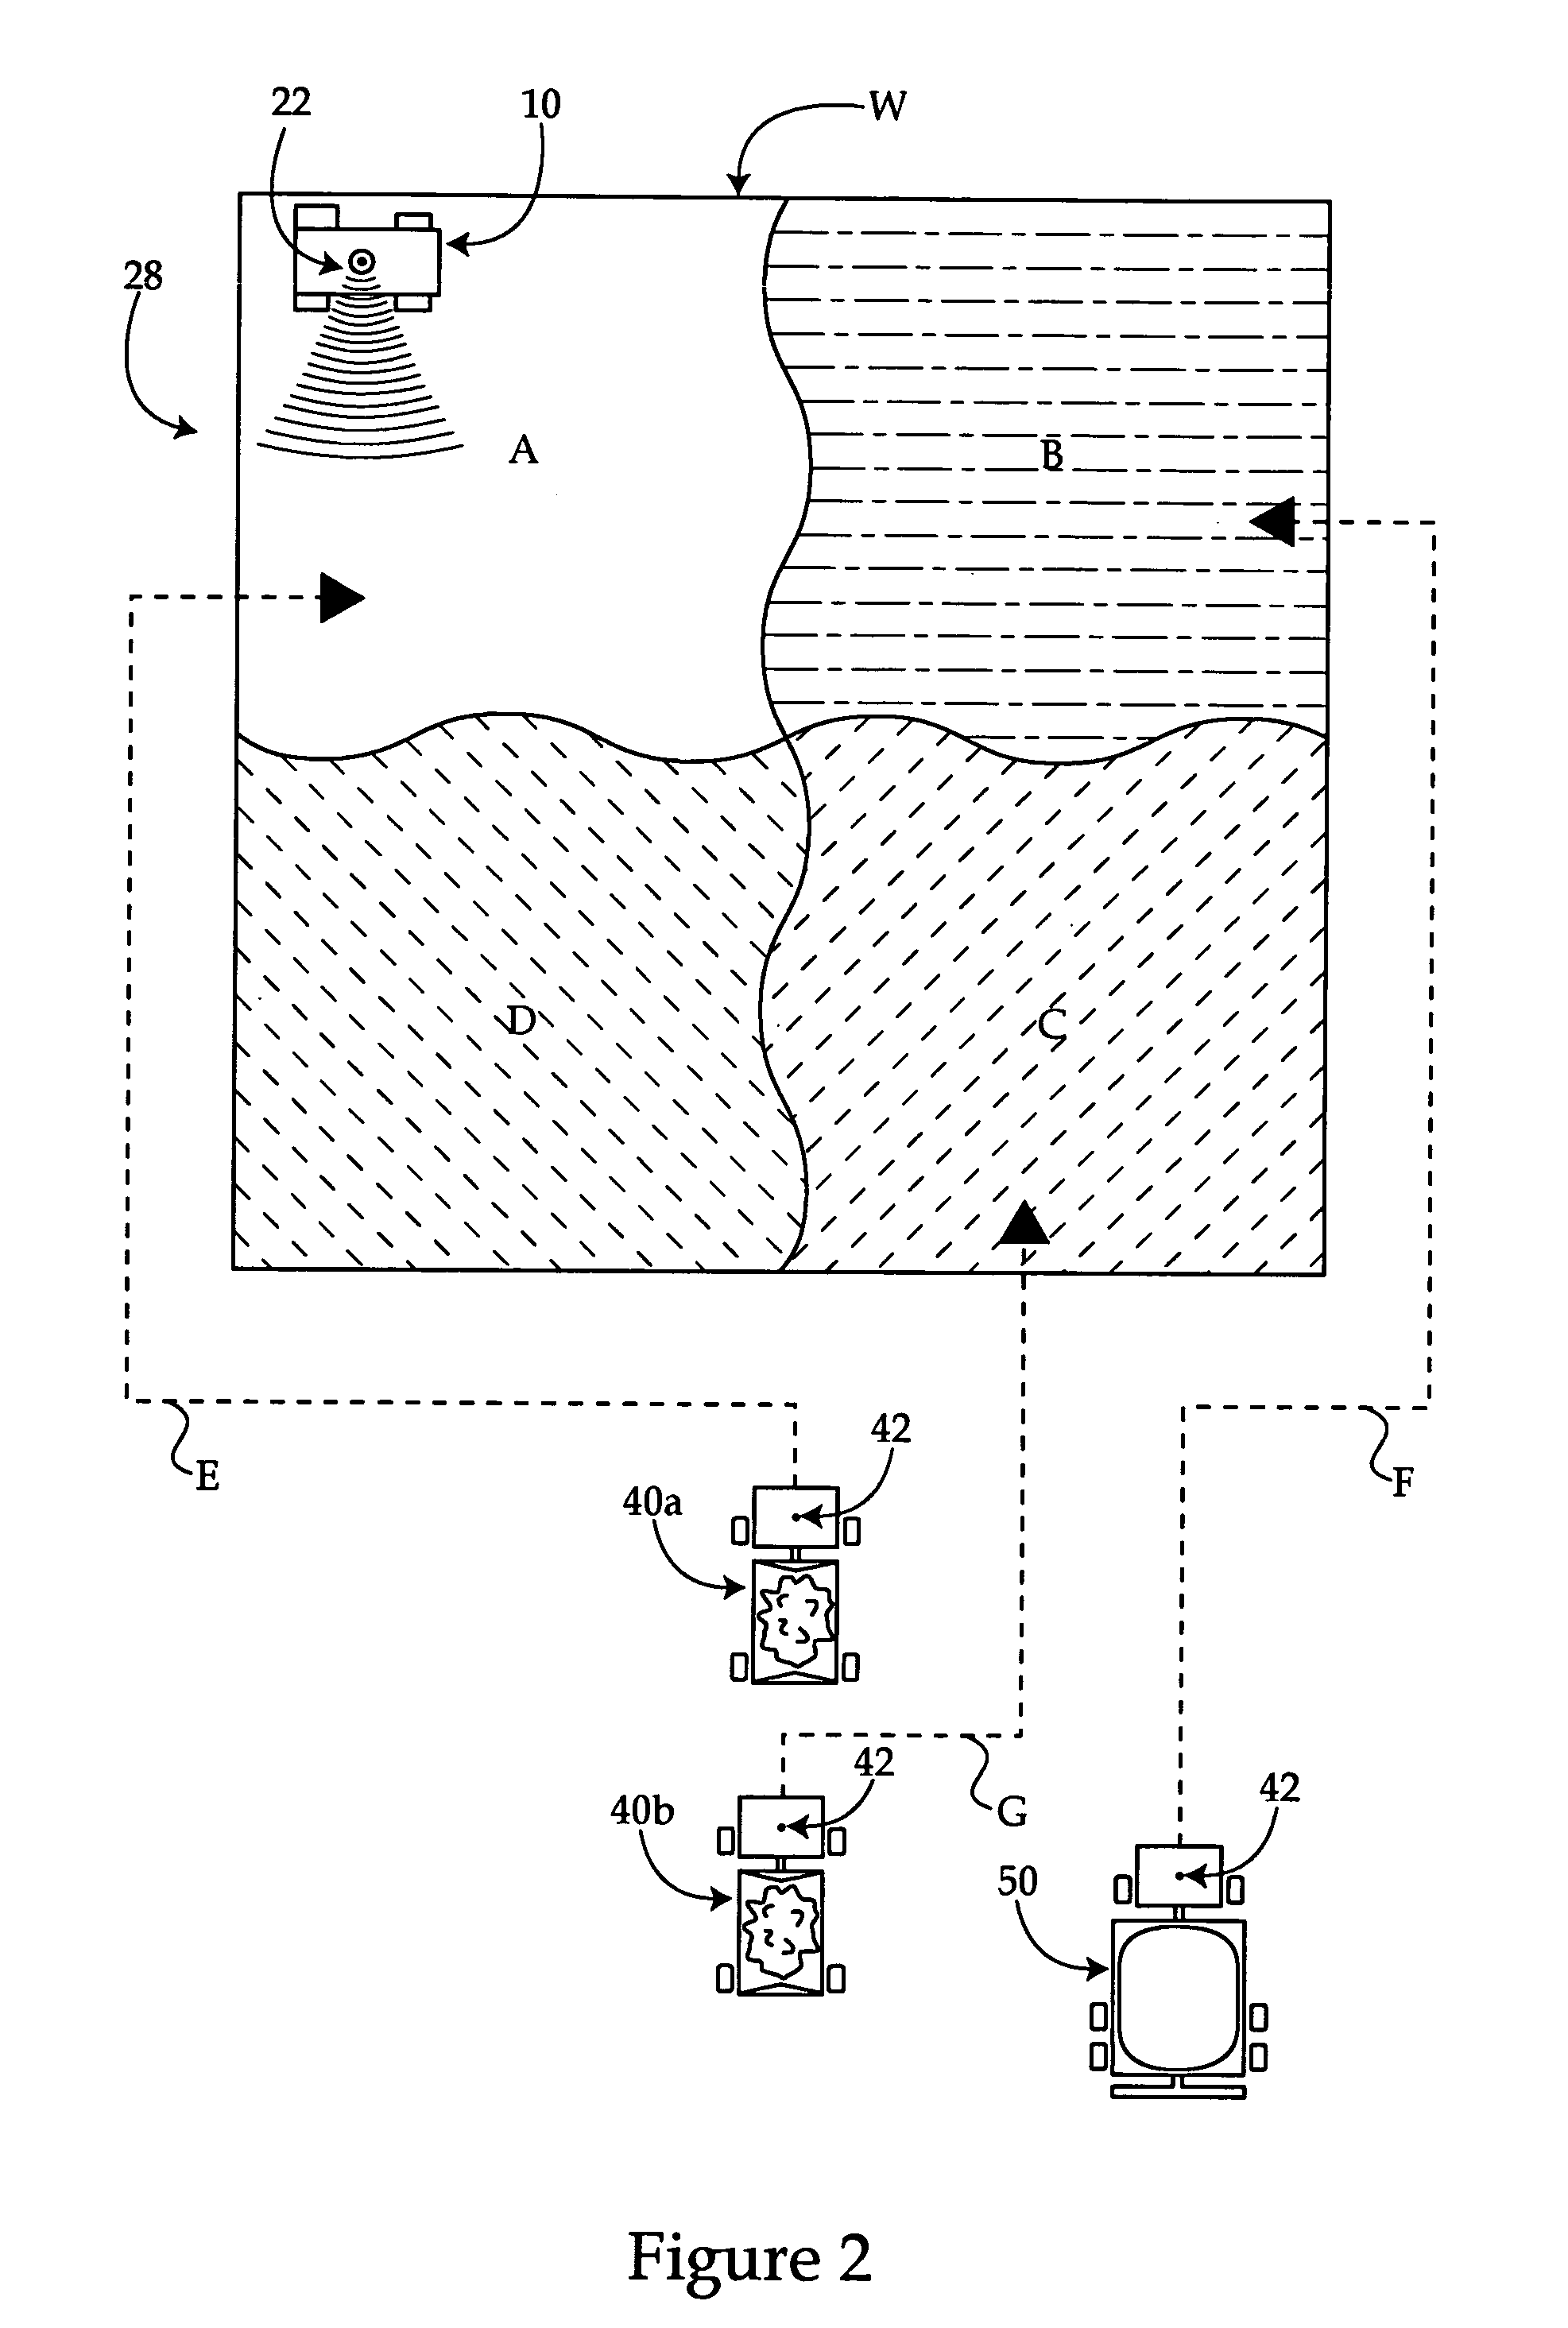 Worksite preparation method using compaction response and mapping information